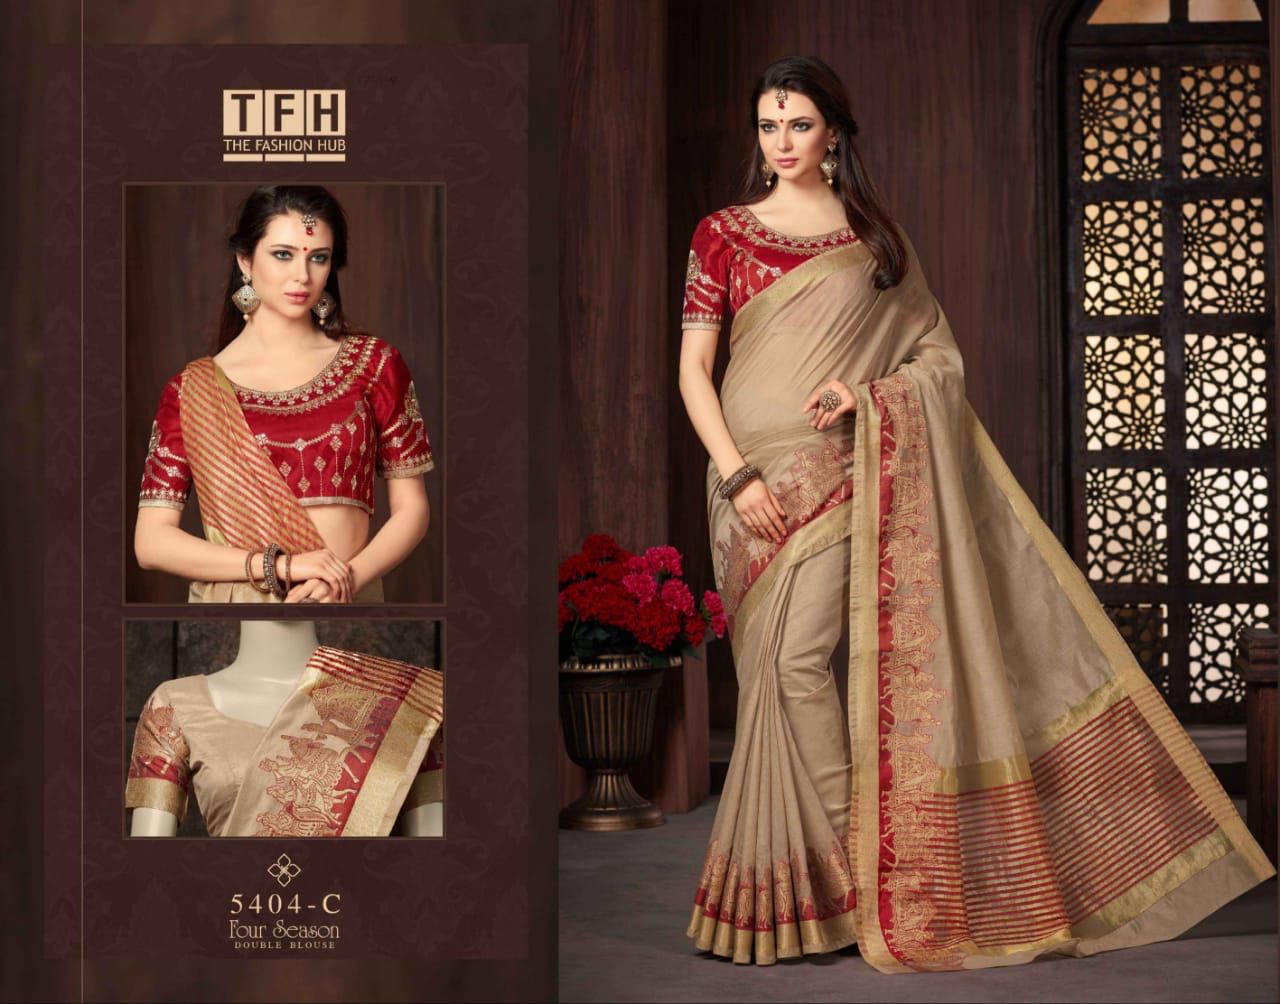 Tfh Four Season Issue 4 Cotton Sarees Catalog Wholesale Supplier Manufacturer From Surat